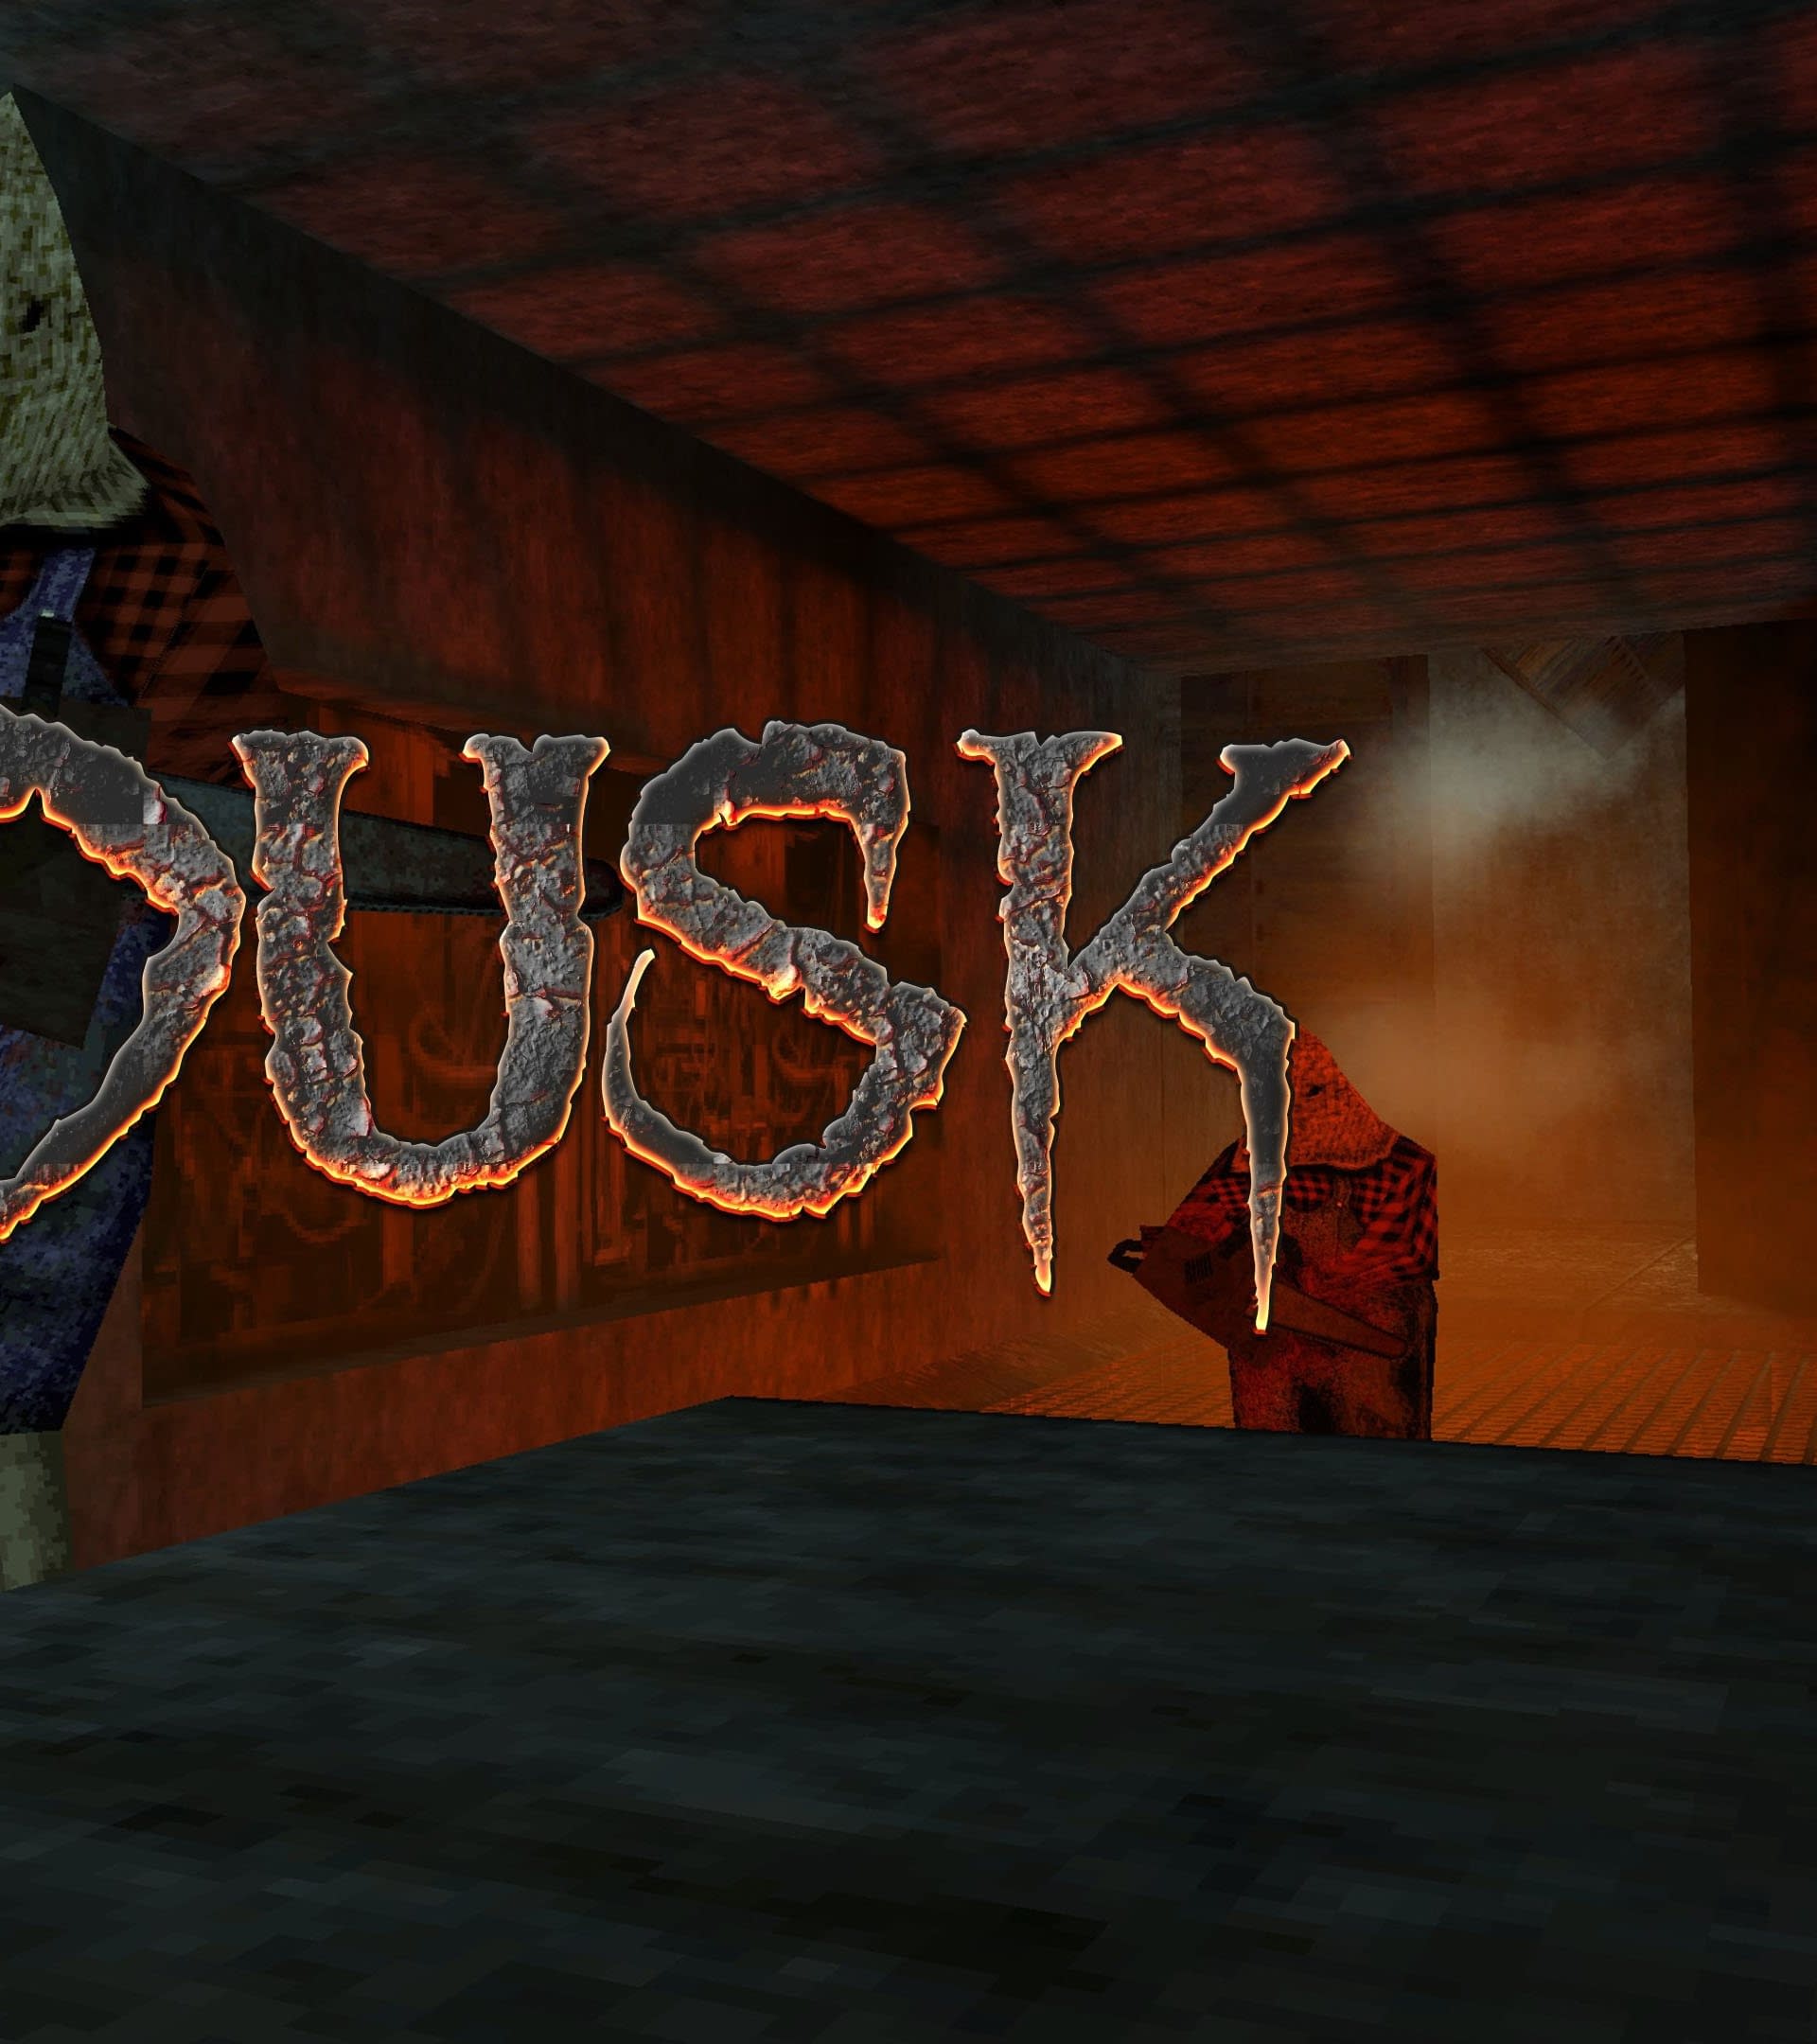 DUSK Comes to PS4 Consoles: Release Date Announced